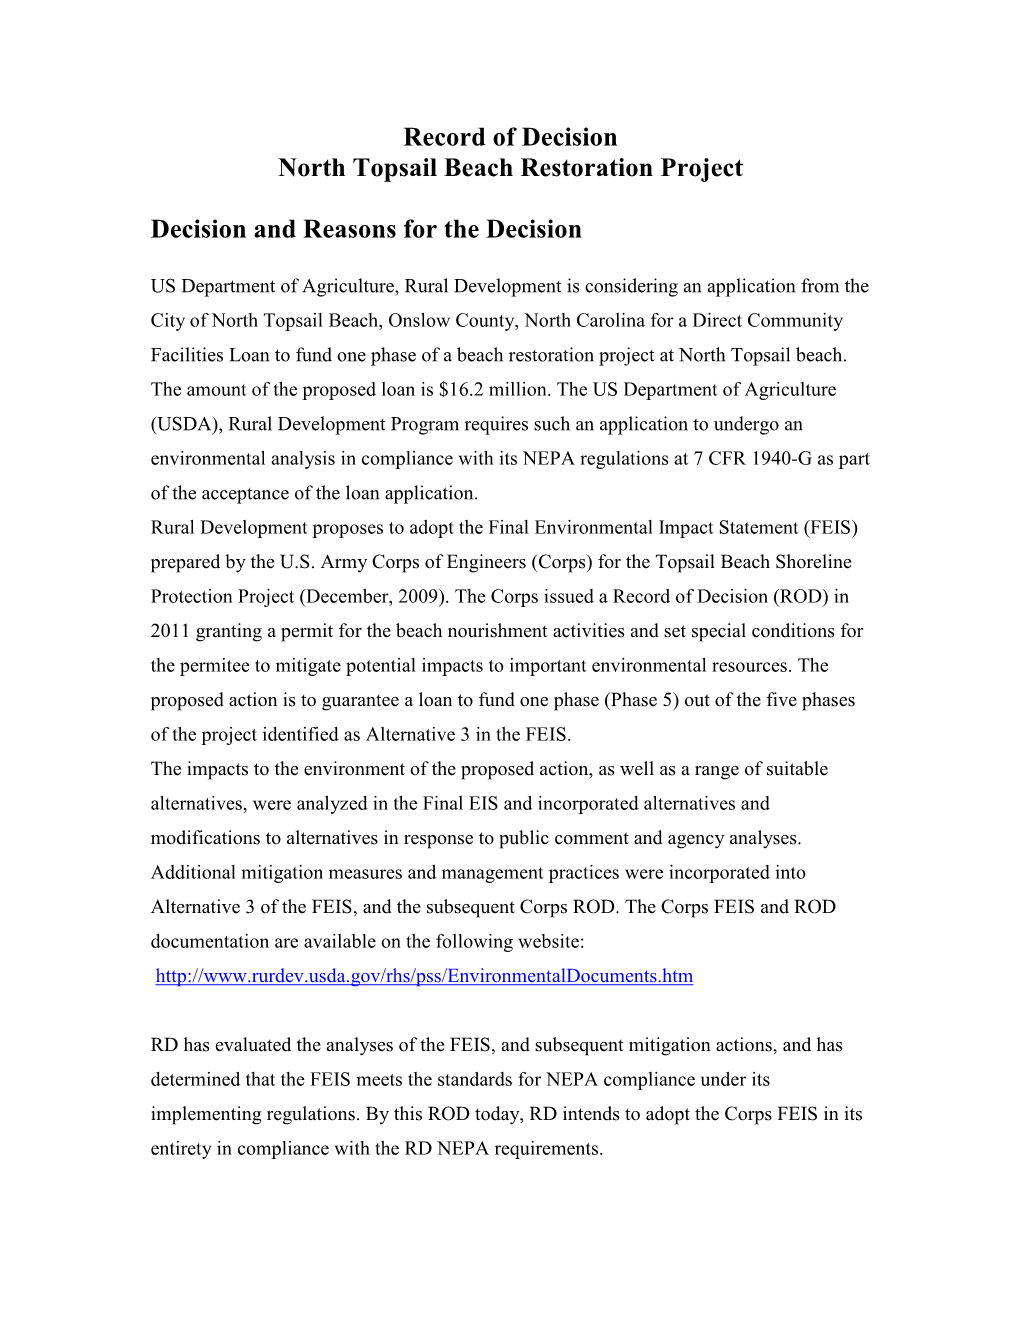 Record of Decision North Topsail Beach Restoration Project